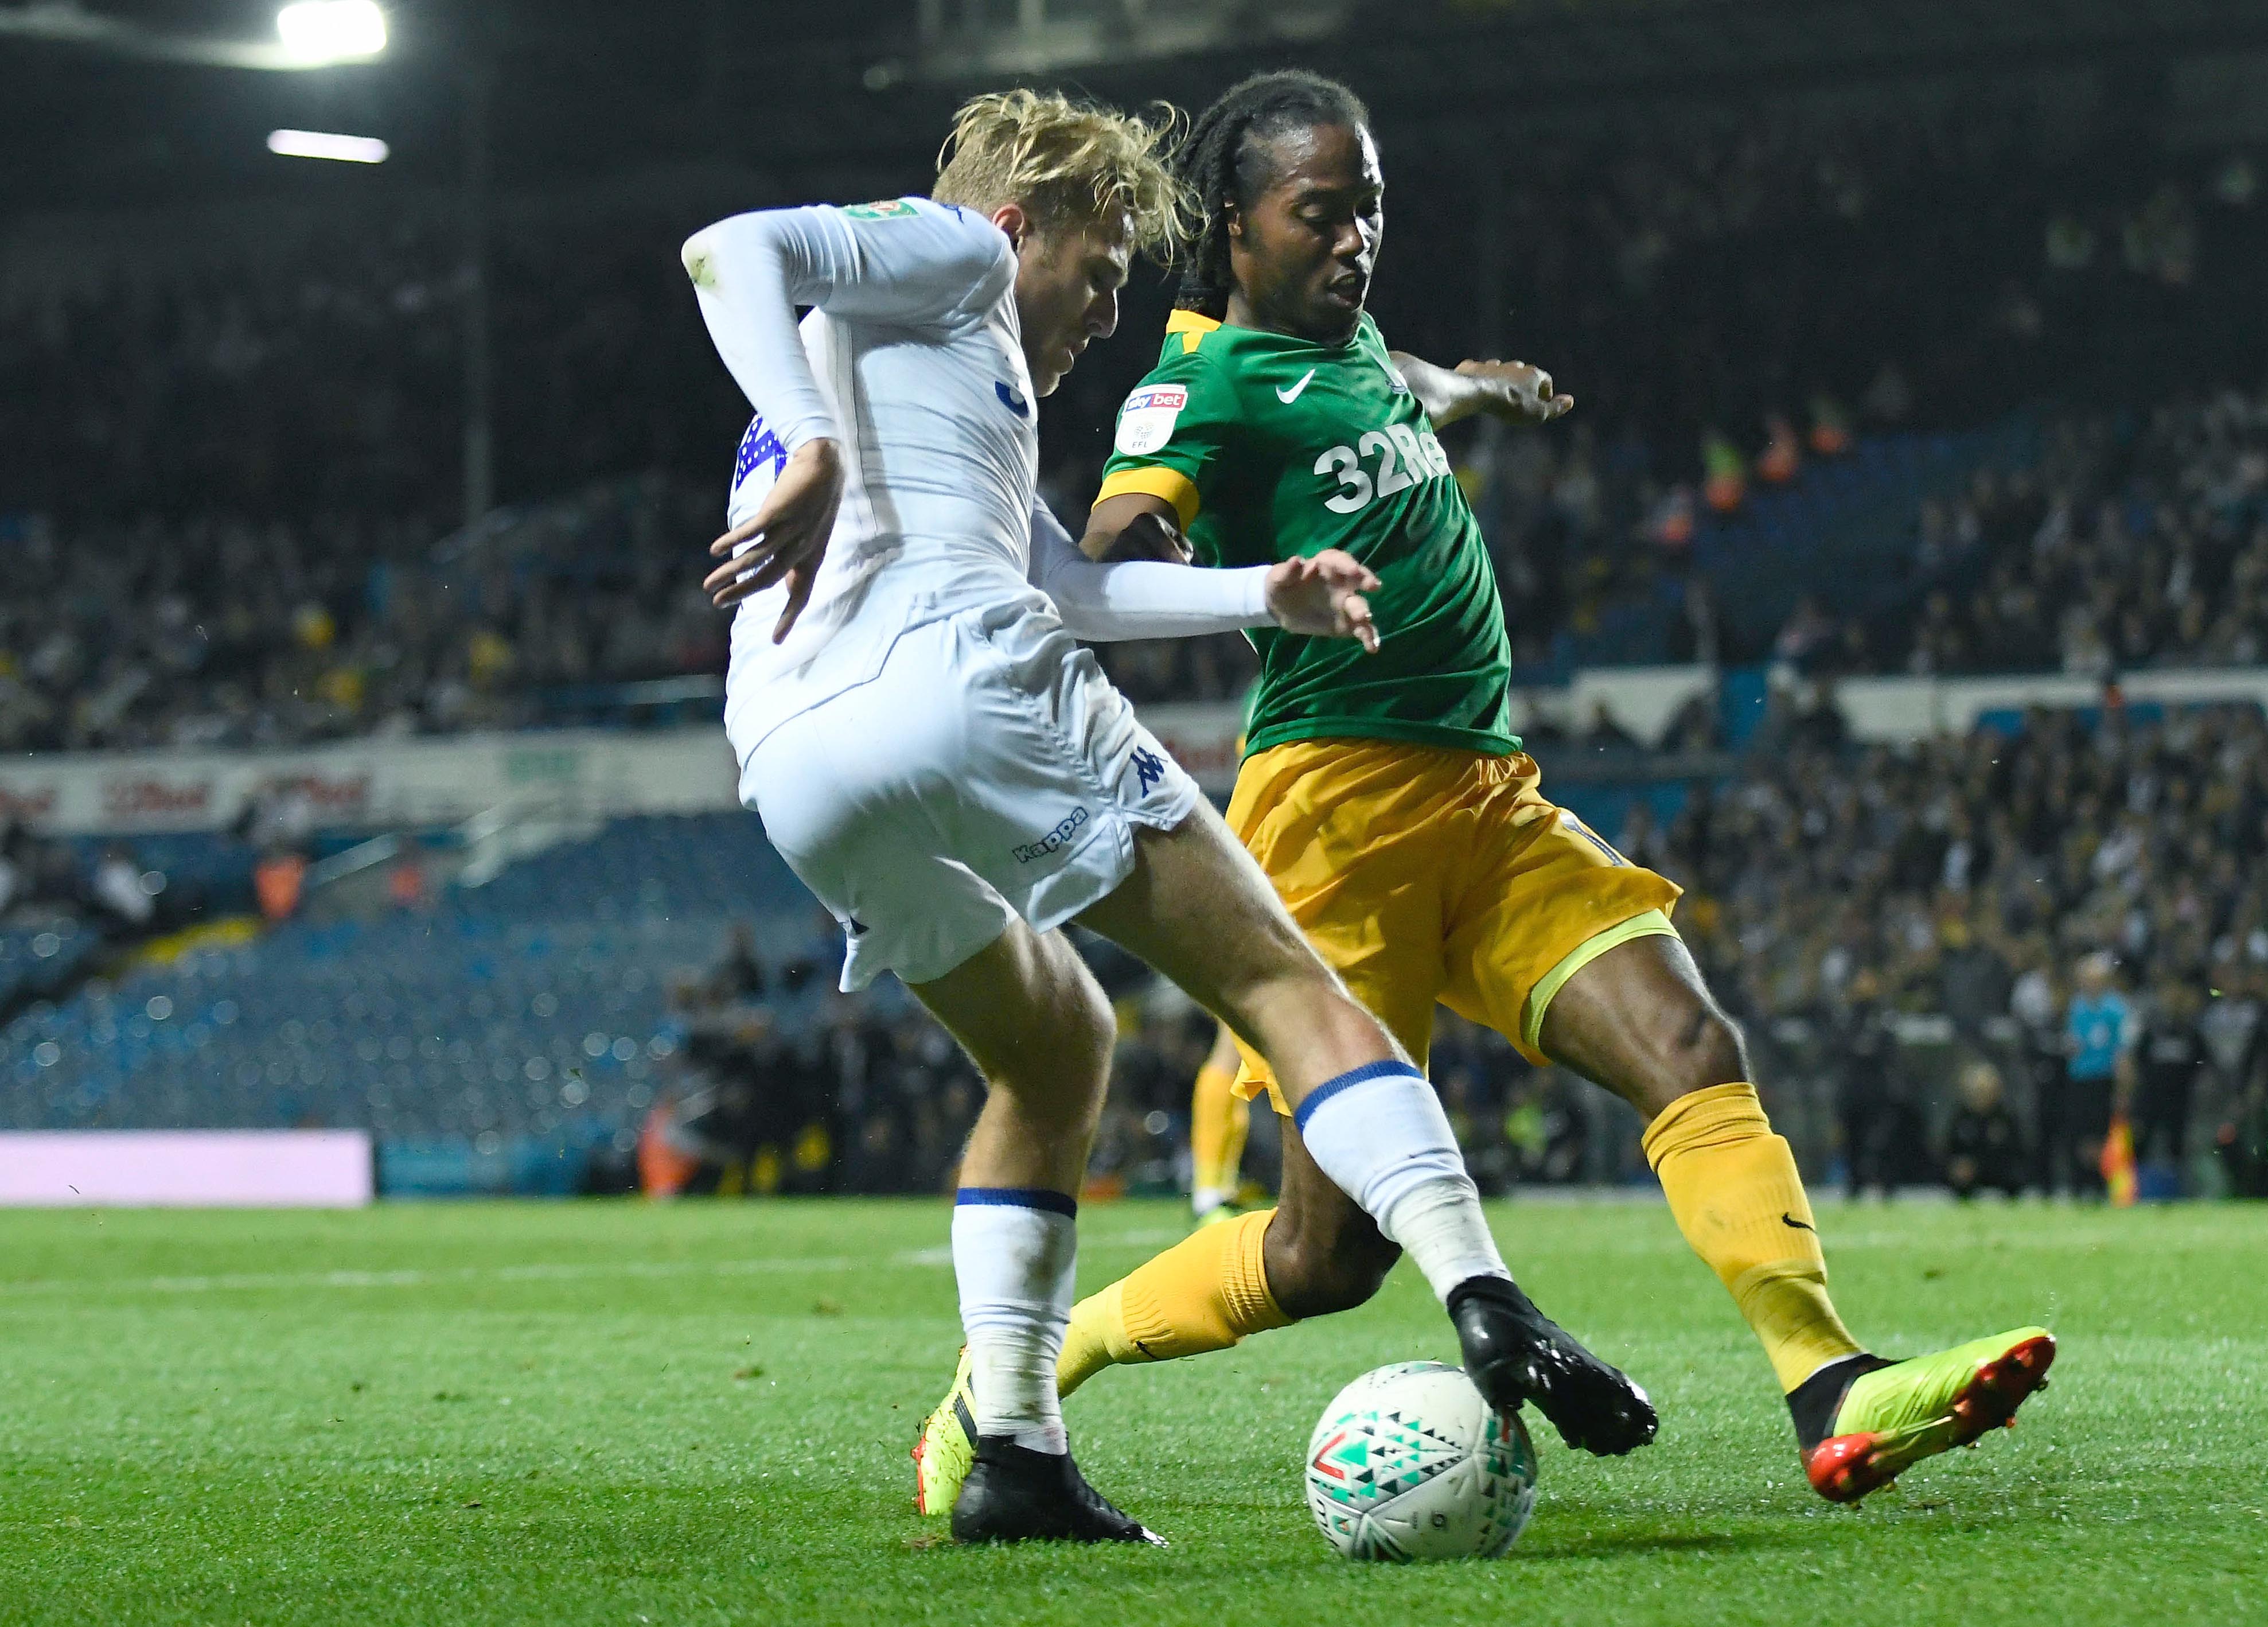 Leeds United v Preston North End - Carabao Cup Second Round